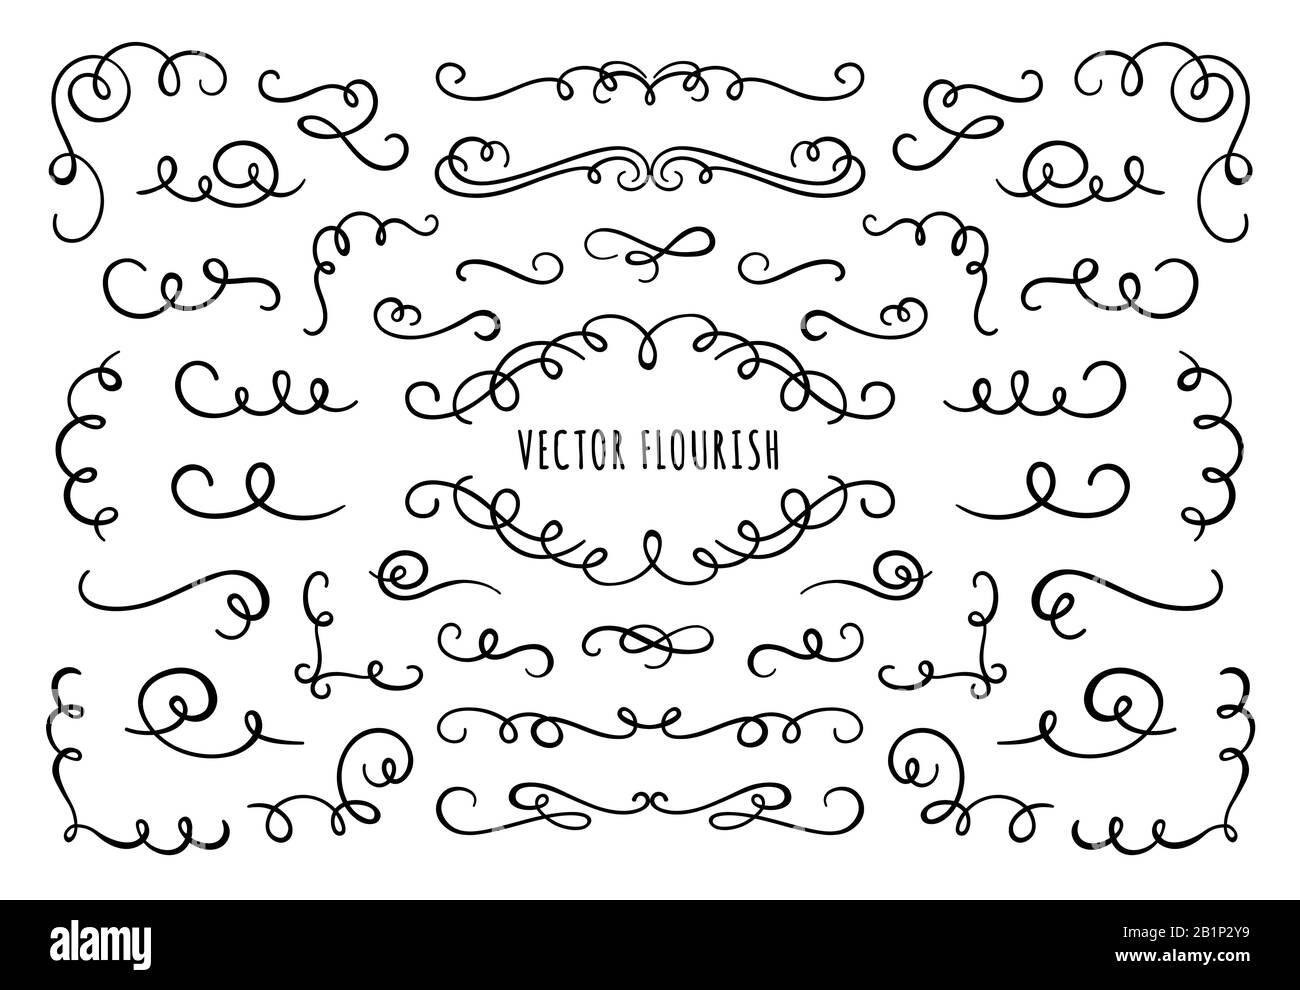 Flourish frame, corners and dividers. Decorative flourishes corner, calligraphic divider and ornate scroll swirls vector set Stock Vector